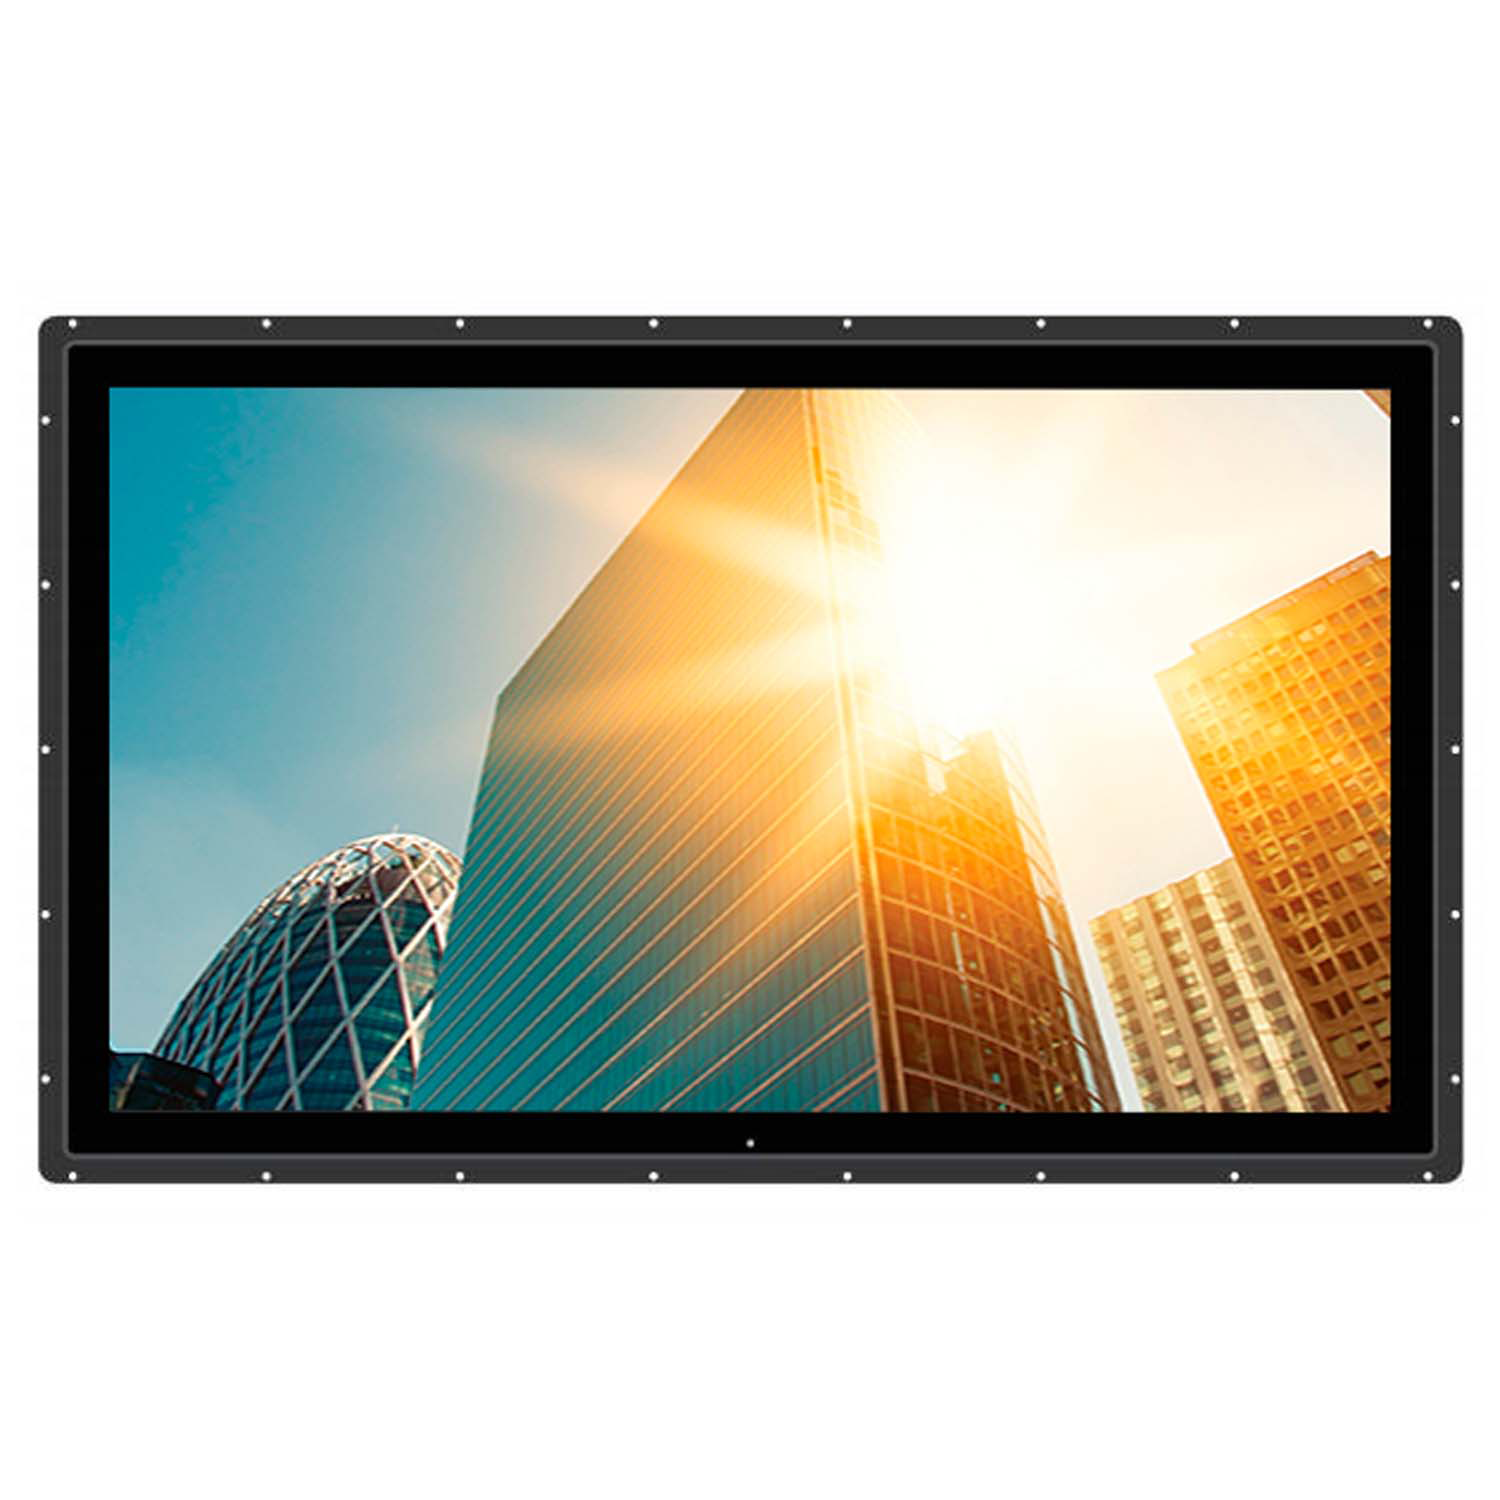 INDUSTRIAL OPEN FRAME HIGH BRIGHT TOUCH MONITOR KEETOUCH 32" KT-320-CHWSGF4